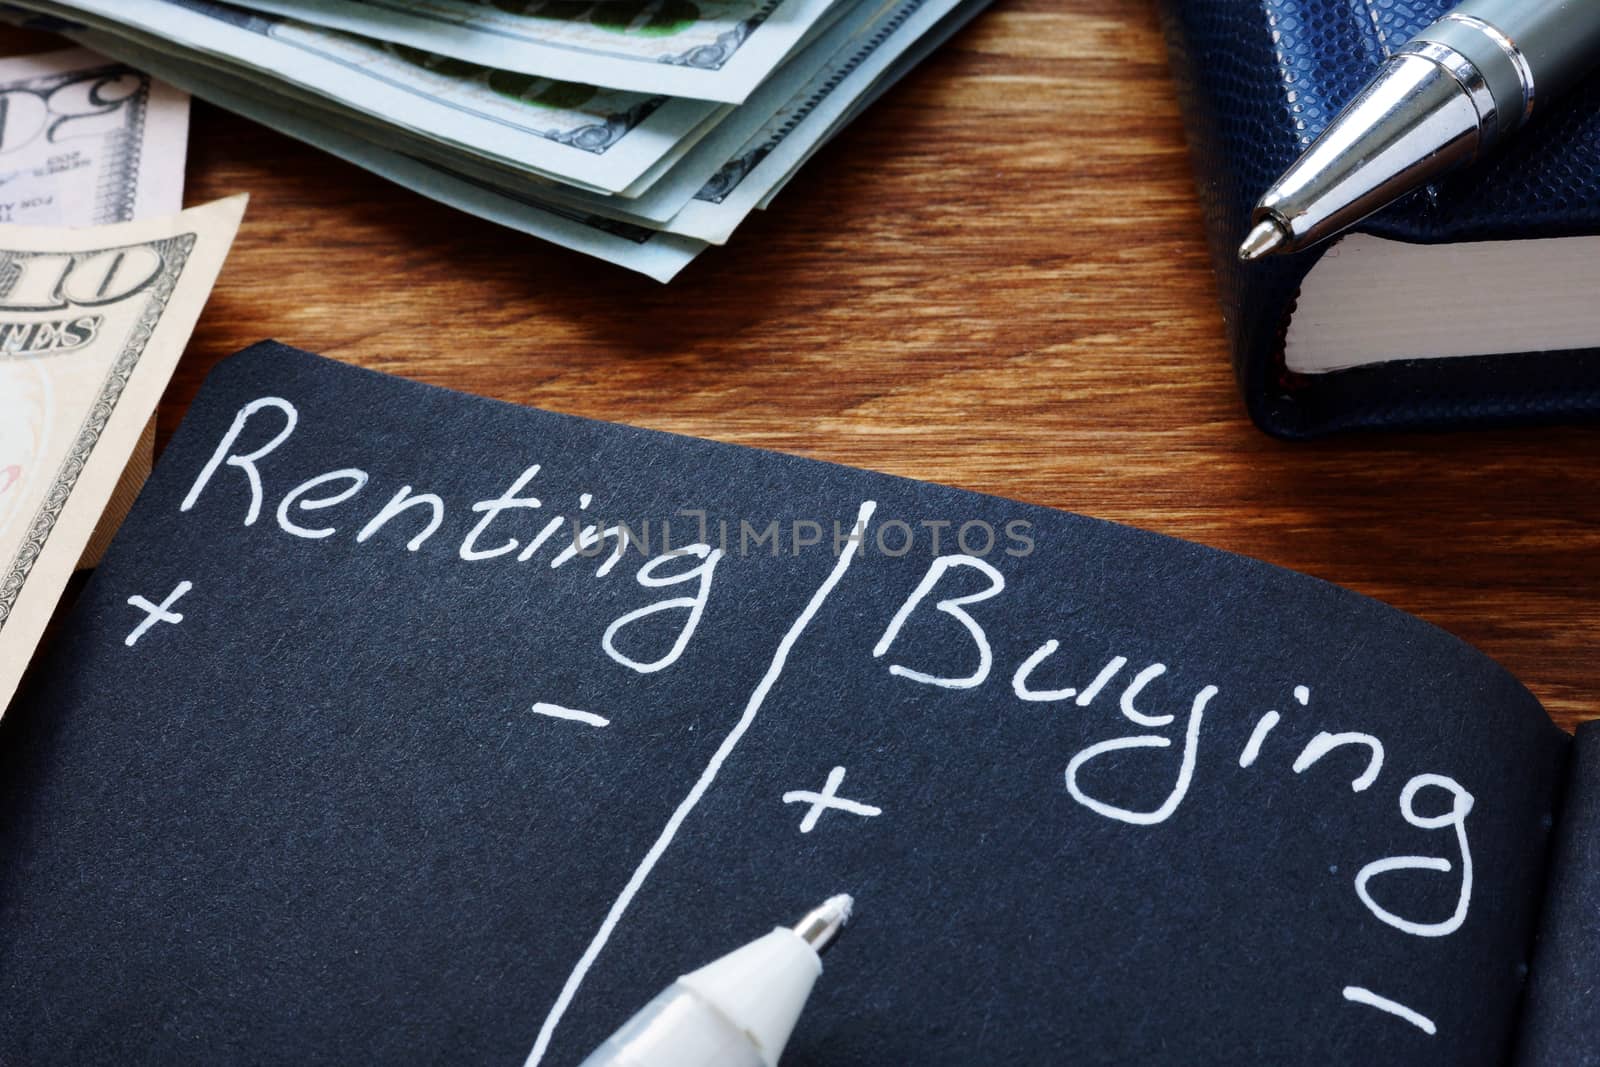 Renting vs buying comparison in the black notebook. by designer491